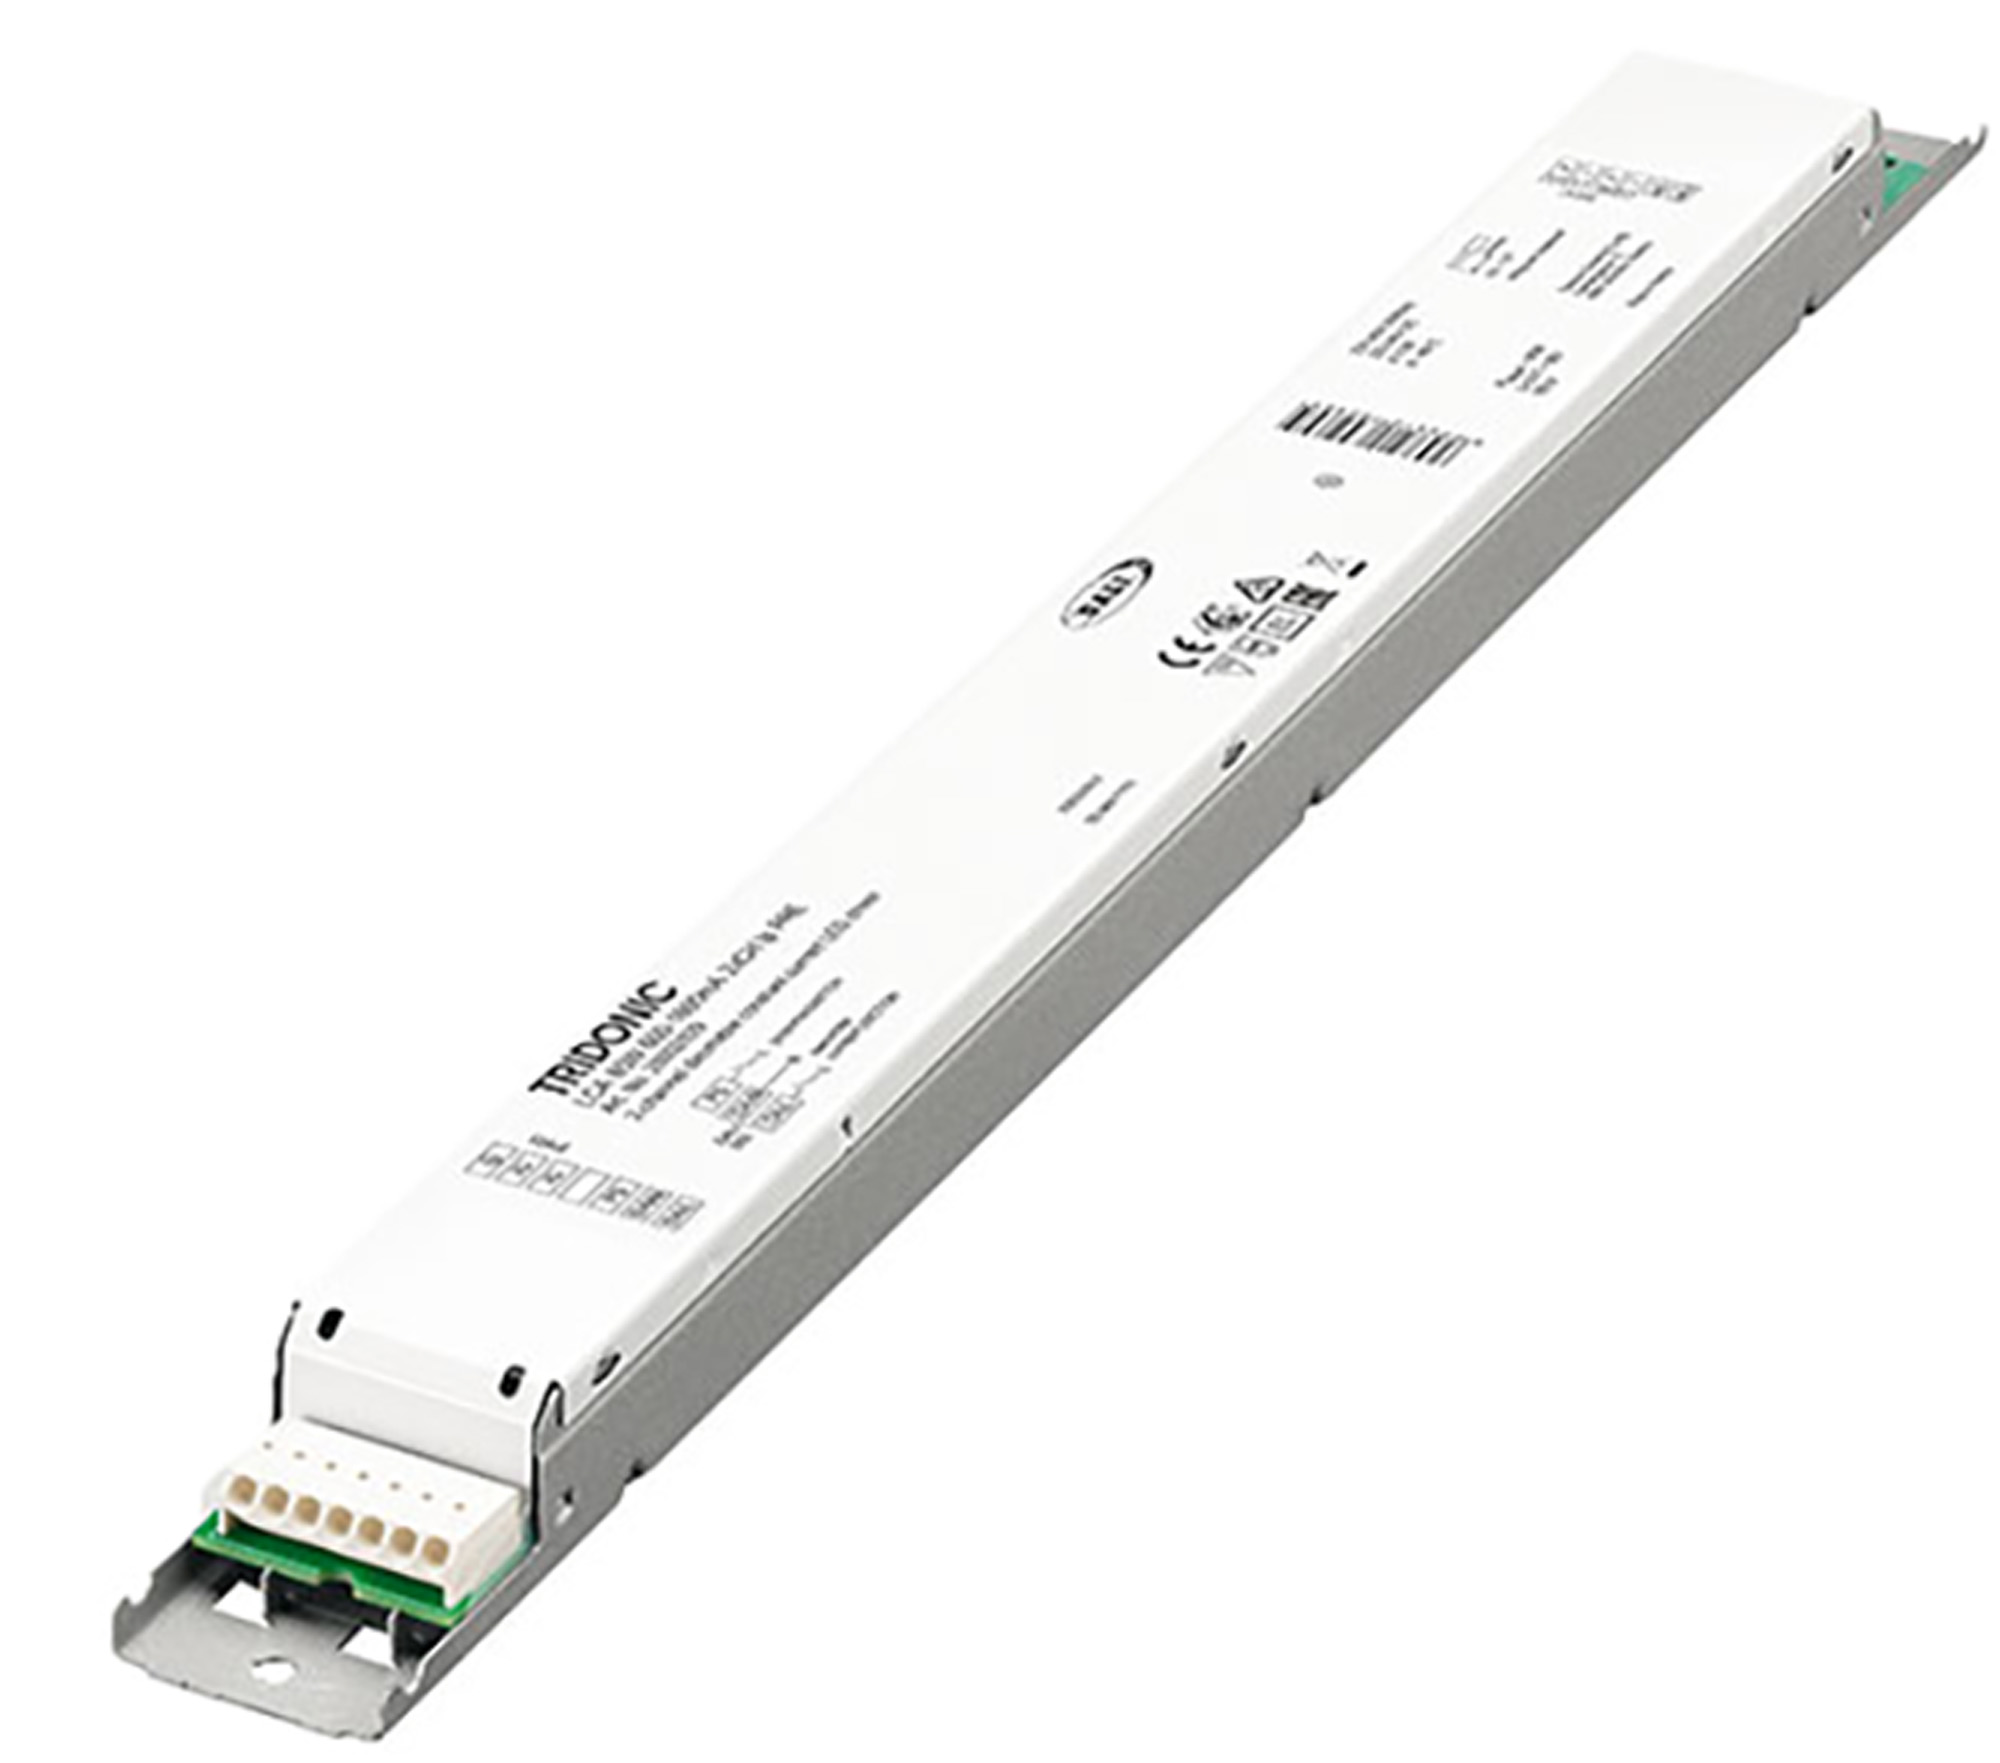 28002829  85W 600-1800mA 2xCH lp PRE MULTI Channel premium SELV  series Driver,  Dimmable built-in constant current 2-channel LED driver with DALI DT6  ,5yrs Warranty